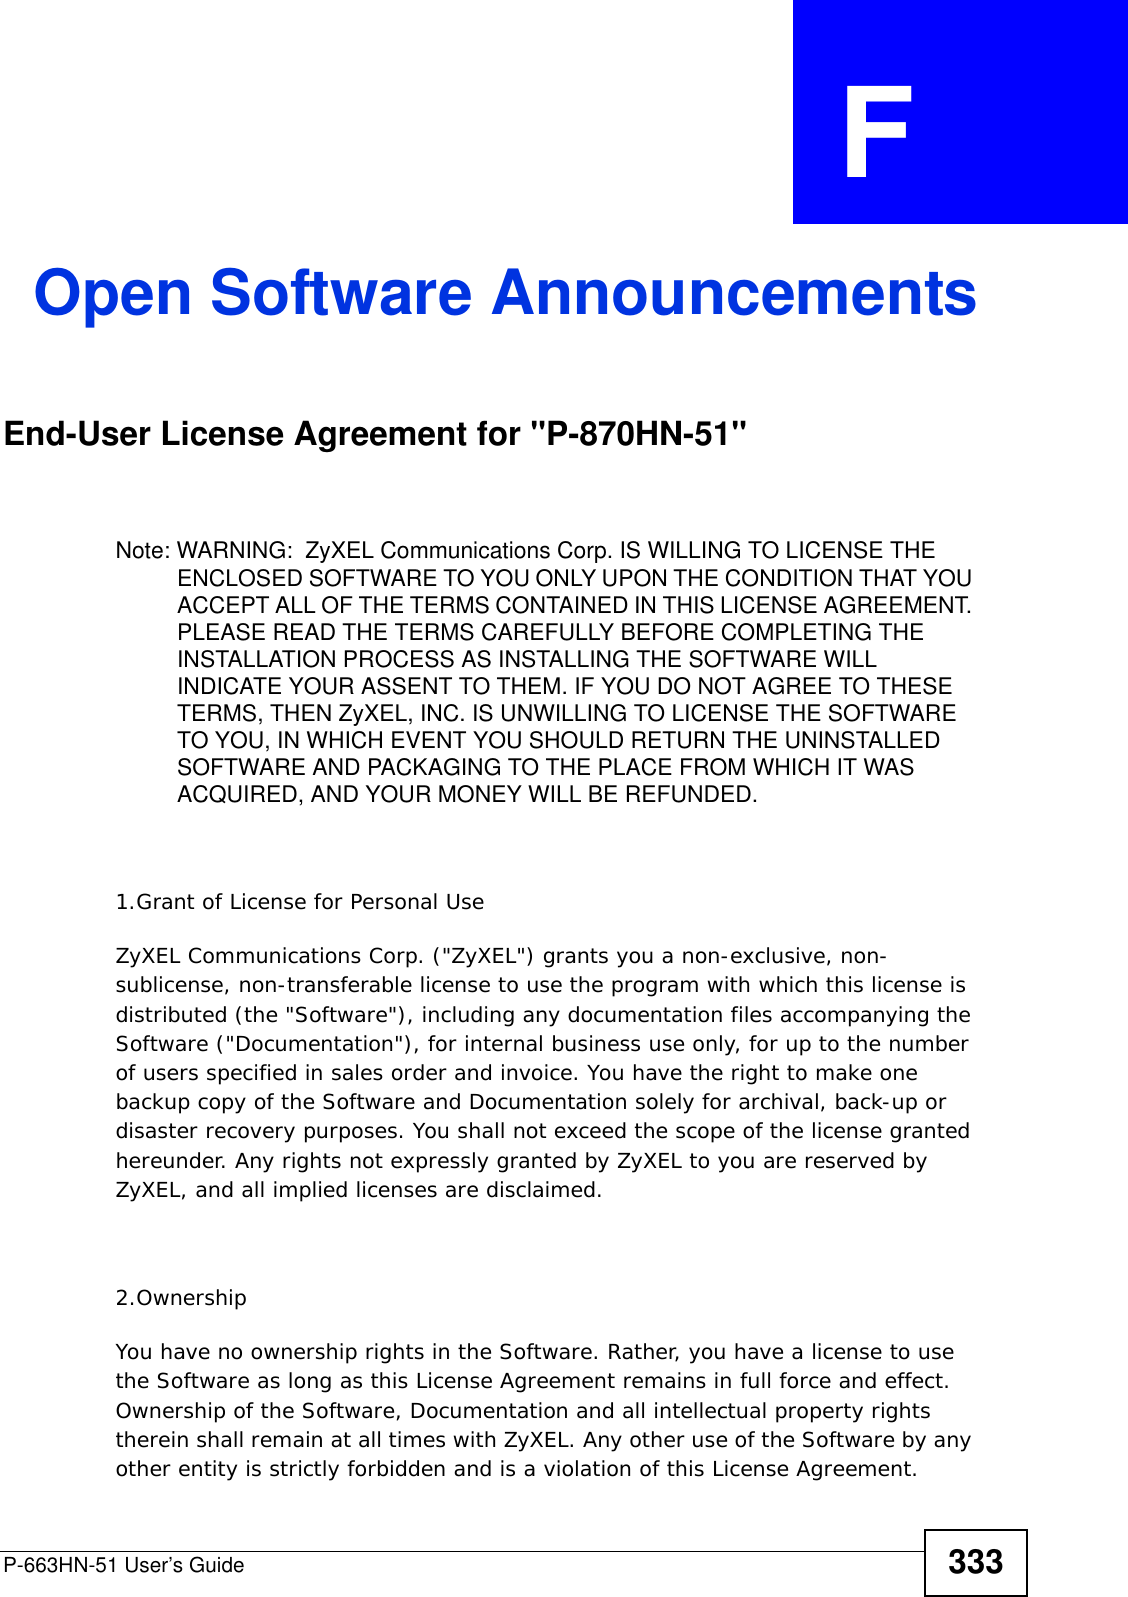 P-663HN-51 User’s Guide 333APPENDIX  F Open Software AnnouncementsEnd-User License Agreement for &quot;P-870HN-51&quot; Note: WARNING:  ZyXEL Communications Corp. IS WILLING TO LICENSE THE ENCLOSED SOFTWARE TO YOU ONLY UPON THE CONDITION THAT YOU ACCEPT ALL OF THE TERMS CONTAINED IN THIS LICENSE AGREEMENT. PLEASE READ THE TERMS CAREFULLY BEFORE COMPLETING THE INSTALLATION PROCESS AS INSTALLING THE SOFTWARE WILL INDICATE YOUR ASSENT TO THEM. IF YOU DO NOT AGREE TO THESE TERMS, THEN ZyXEL, INC. IS UNWILLING TO LICENSE THE SOFTWARE TO YOU, IN WHICH EVENT YOU SHOULD RETURN THE UNINSTALLED SOFTWARE AND PACKAGING TO THE PLACE FROM WHICH IT WAS ACQUIRED, AND YOUR MONEY WILL BE REFUNDED.1.Grant of License for Personal UseZyXEL Communications Corp. (&quot;ZyXEL&quot;) grants you a non-exclusive, non-sublicense, non-transferable license to use the program with which this license is distributed (the &quot;Software&quot;), including any documentation files accompanying the Software (&quot;Documentation&quot;), for internal business use only, for up to the number of users specified in sales order and invoice. You have the right to make one backup copy of the Software and Documentation solely for archival, back-up or disaster recovery purposes. You shall not exceed the scope of the license granted hereunder. Any rights not expressly granted by ZyXEL to you are reserved by ZyXEL, and all implied licenses are disclaimed.2.OwnershipYou have no ownership rights in the Software. Rather, you have a license to use the Software as long as this License Agreement remains in full force and effect.  Ownership of the Software, Documentation and all intellectual property rights therein shall remain at all times with ZyXEL. Any other use of the Software by any other entity is strictly forbidden and is a violation of this License Agreement.